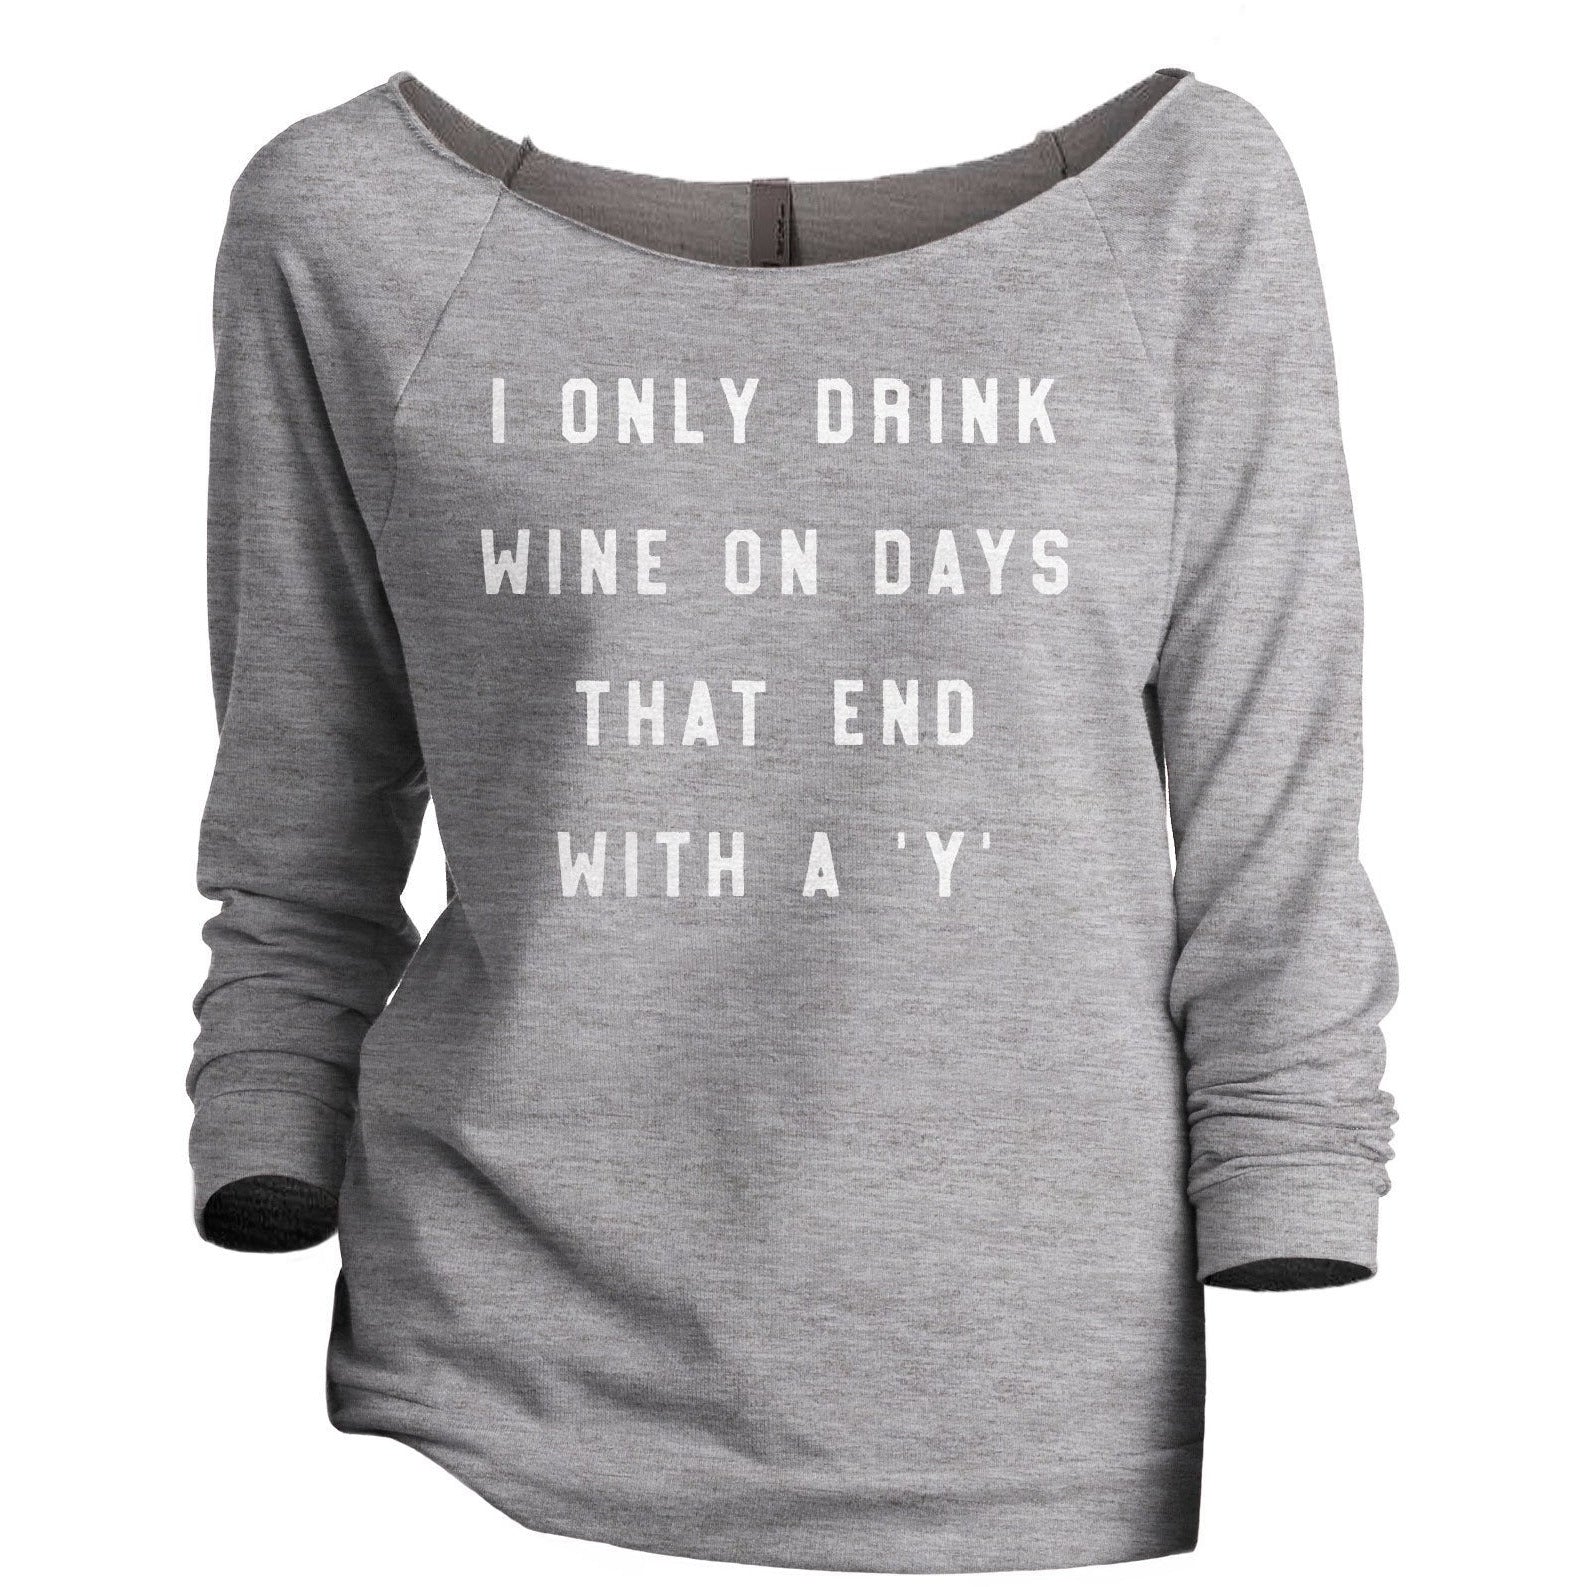 Drink Wine On Days Ends With Y Women's Graphic Printed Lightweight Slouchy 3/4 Sleeves Sweatshirt Sport Grey